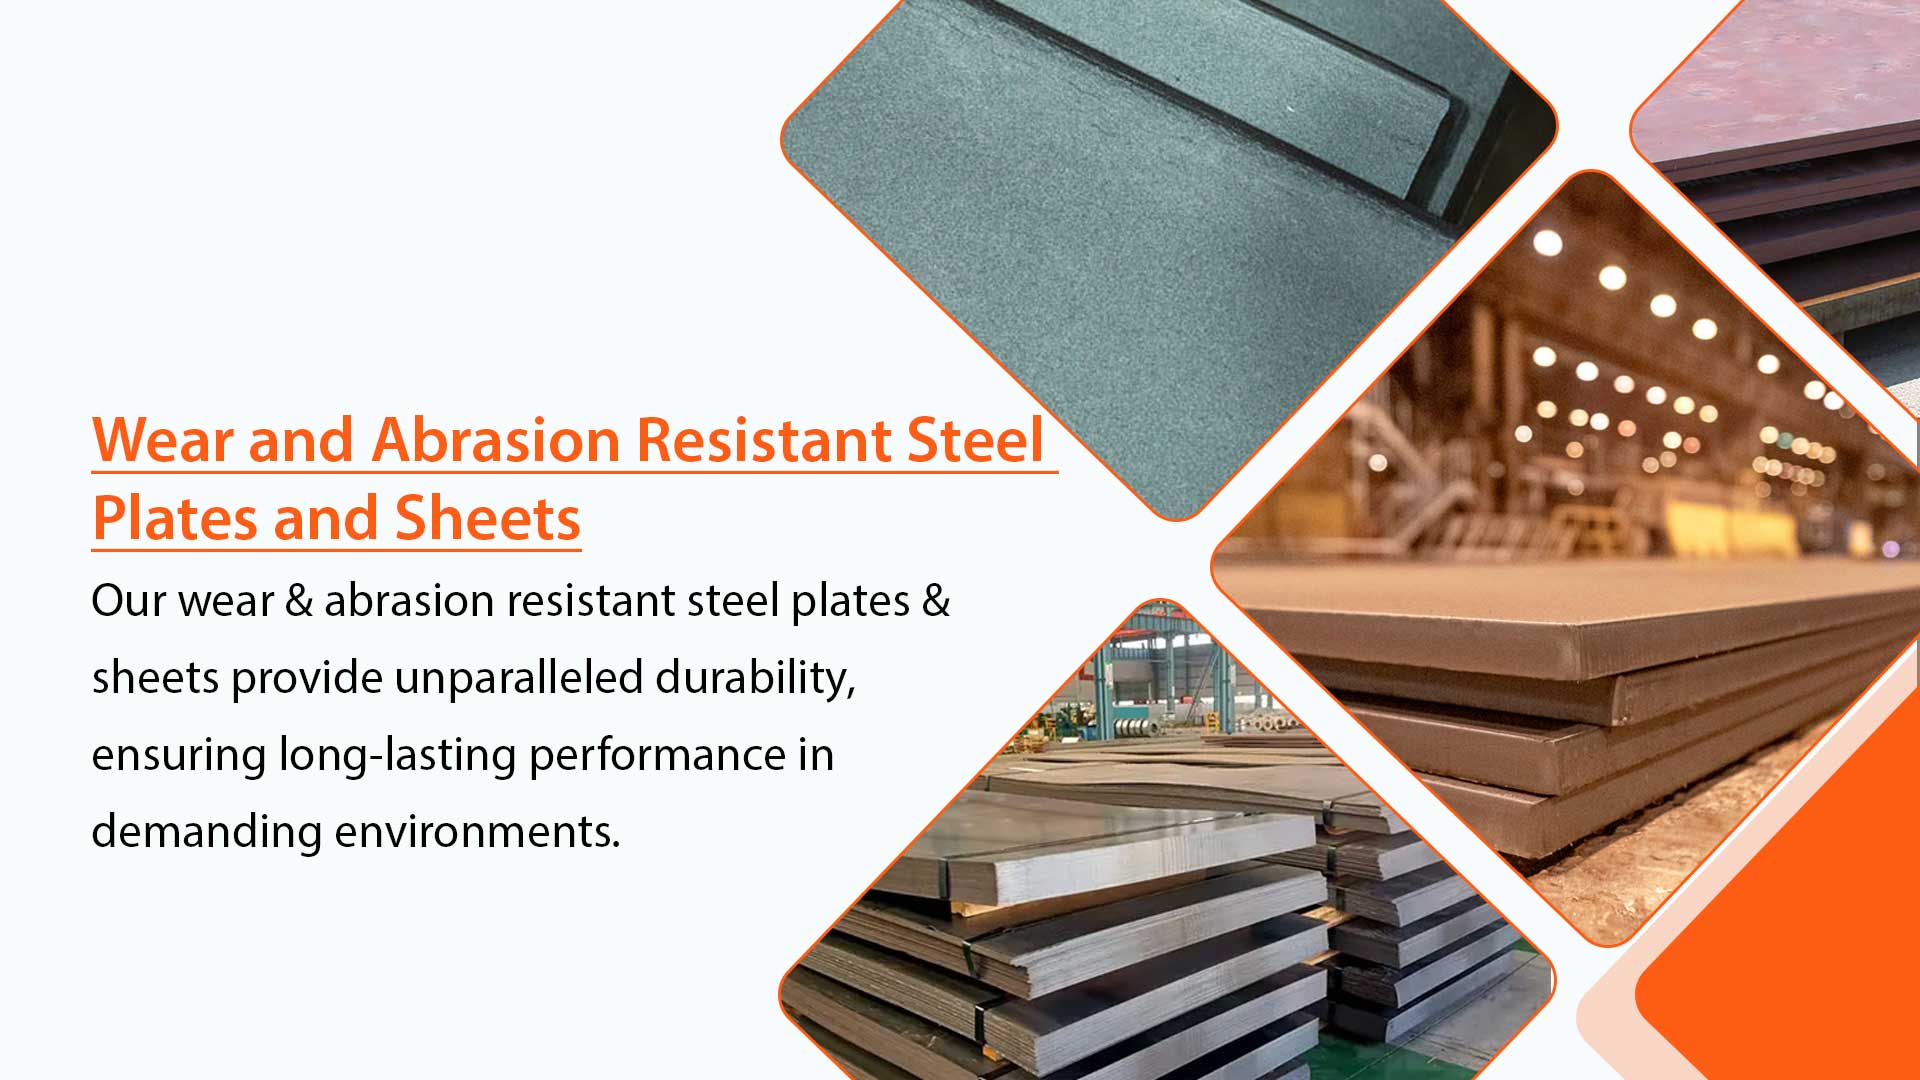 Wear and Abrasion Resistant Steel Plates and Sheets in Kenya